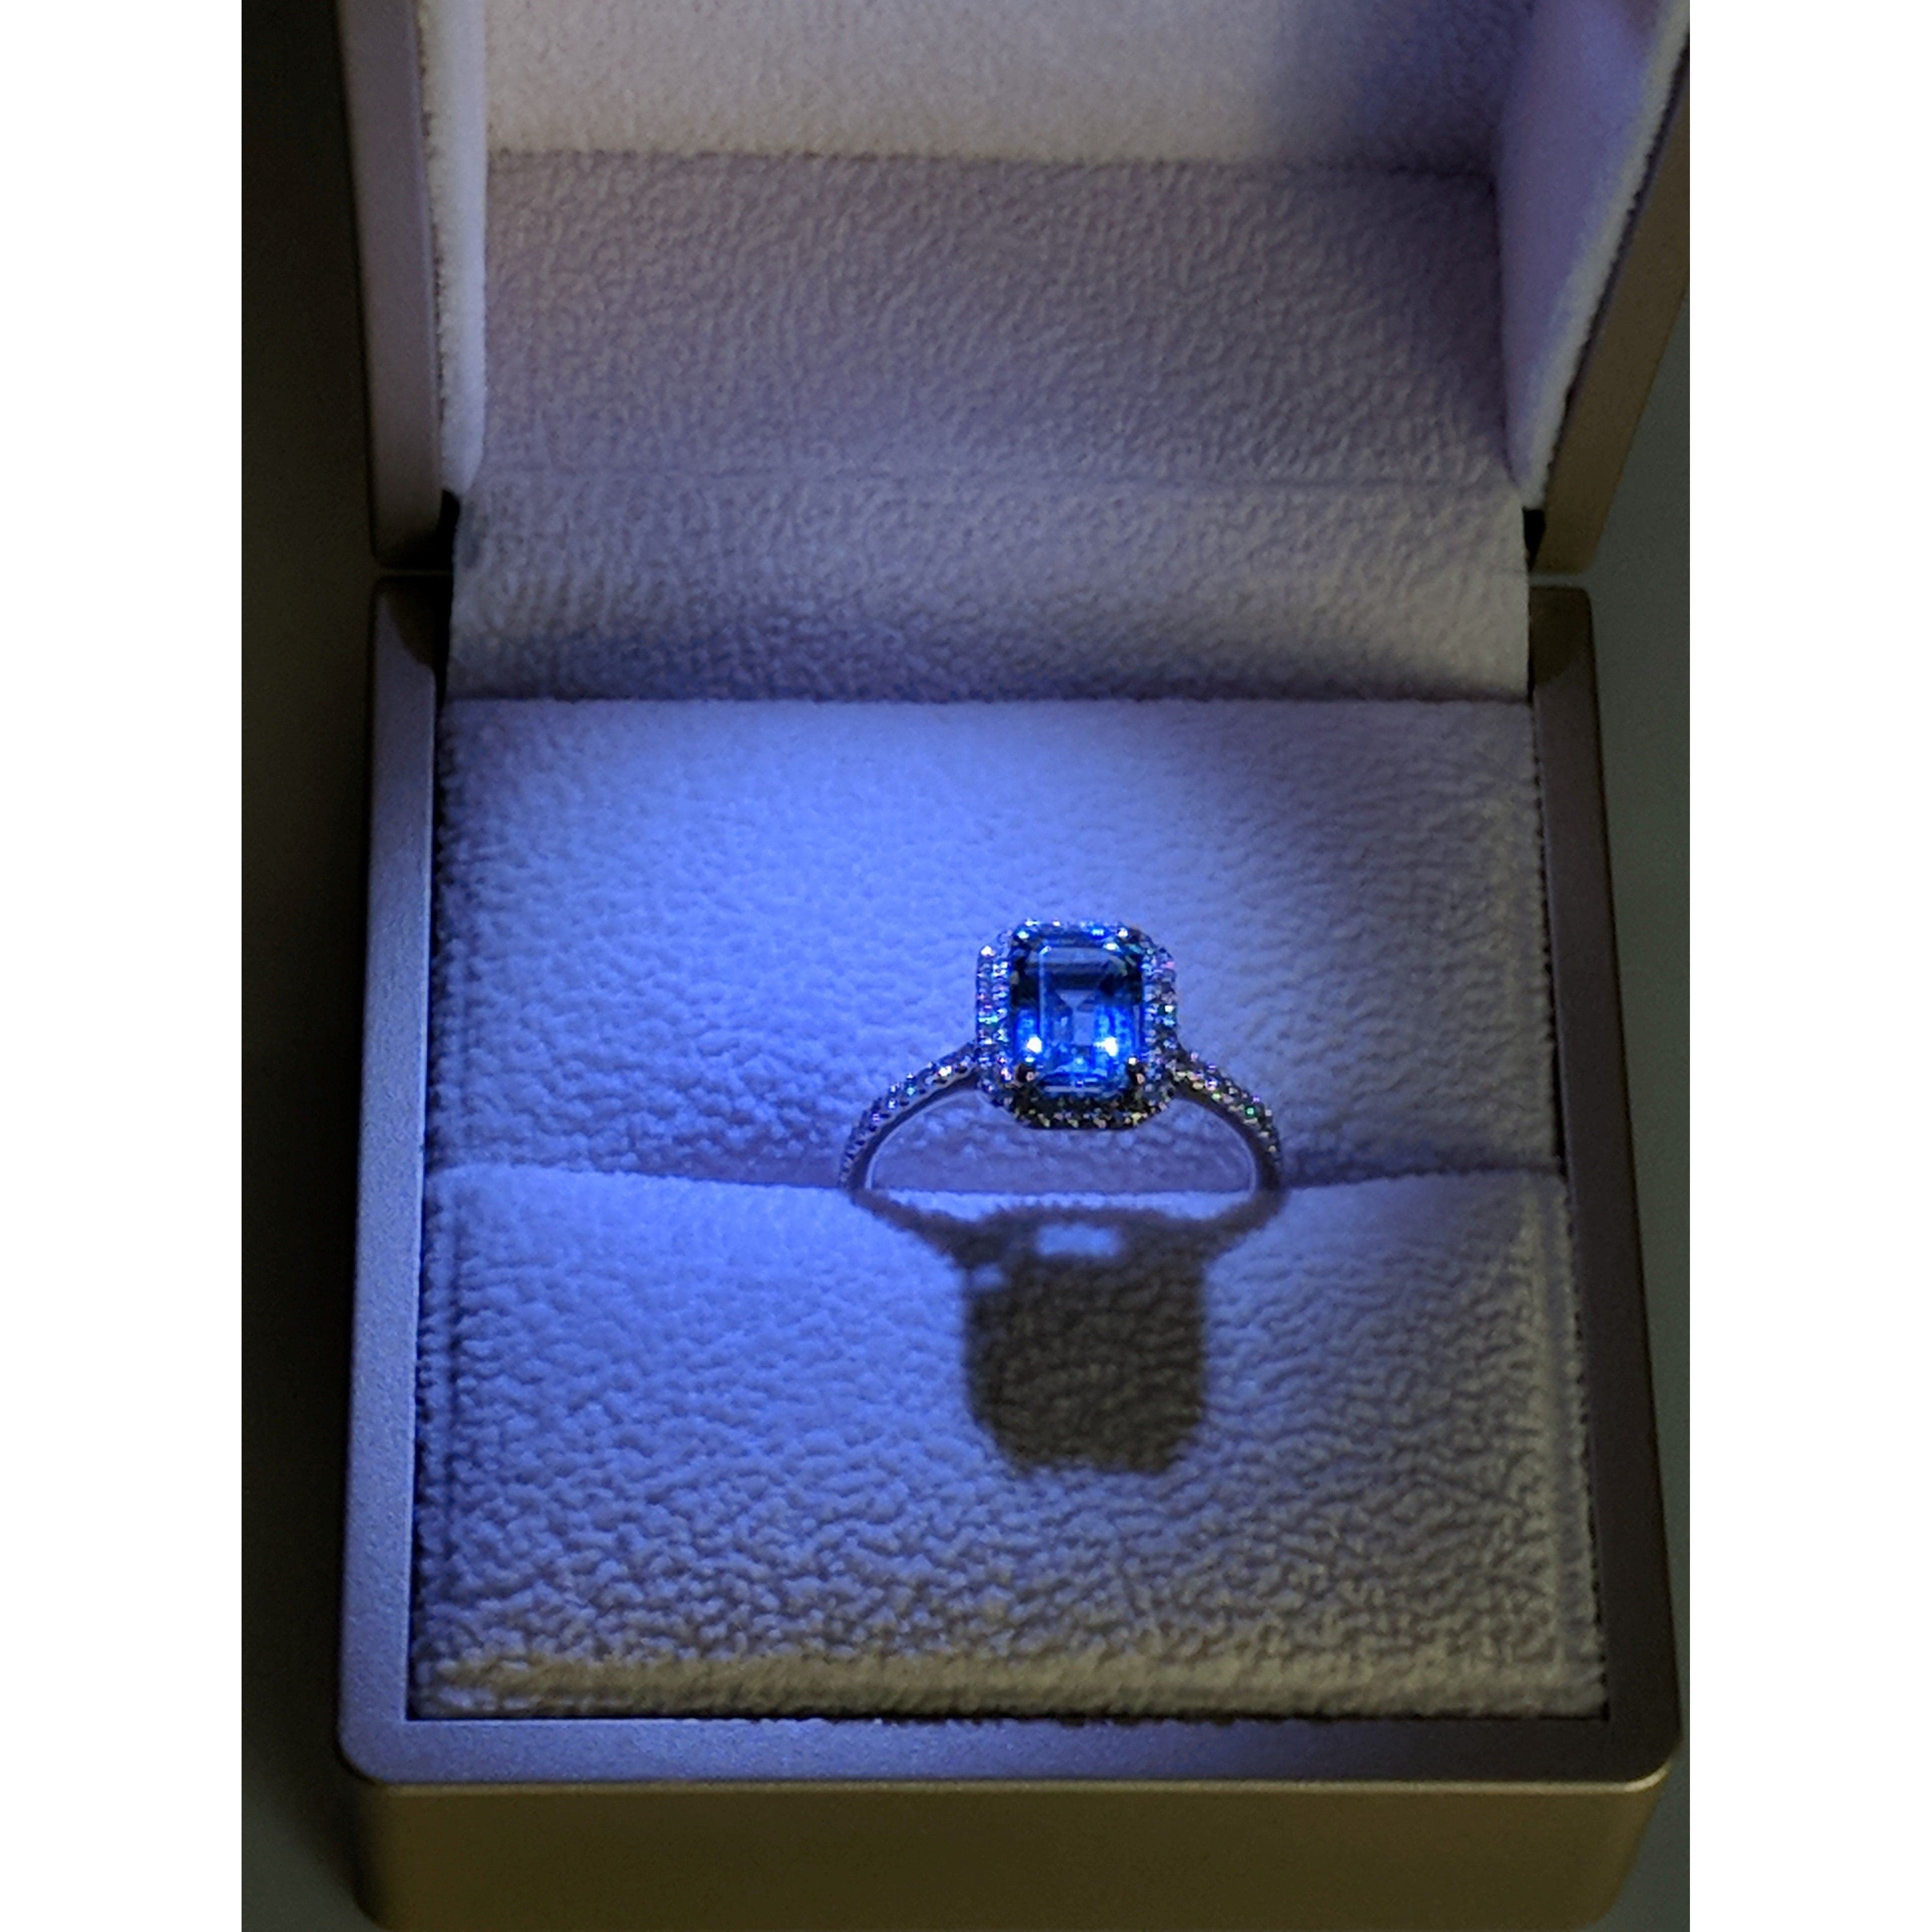 Aquamarine and Diamond Halo Ring, 14K Gold, Emerald Cut-Extraordinary! - The Pink Pigs, A Compassionate Boutique